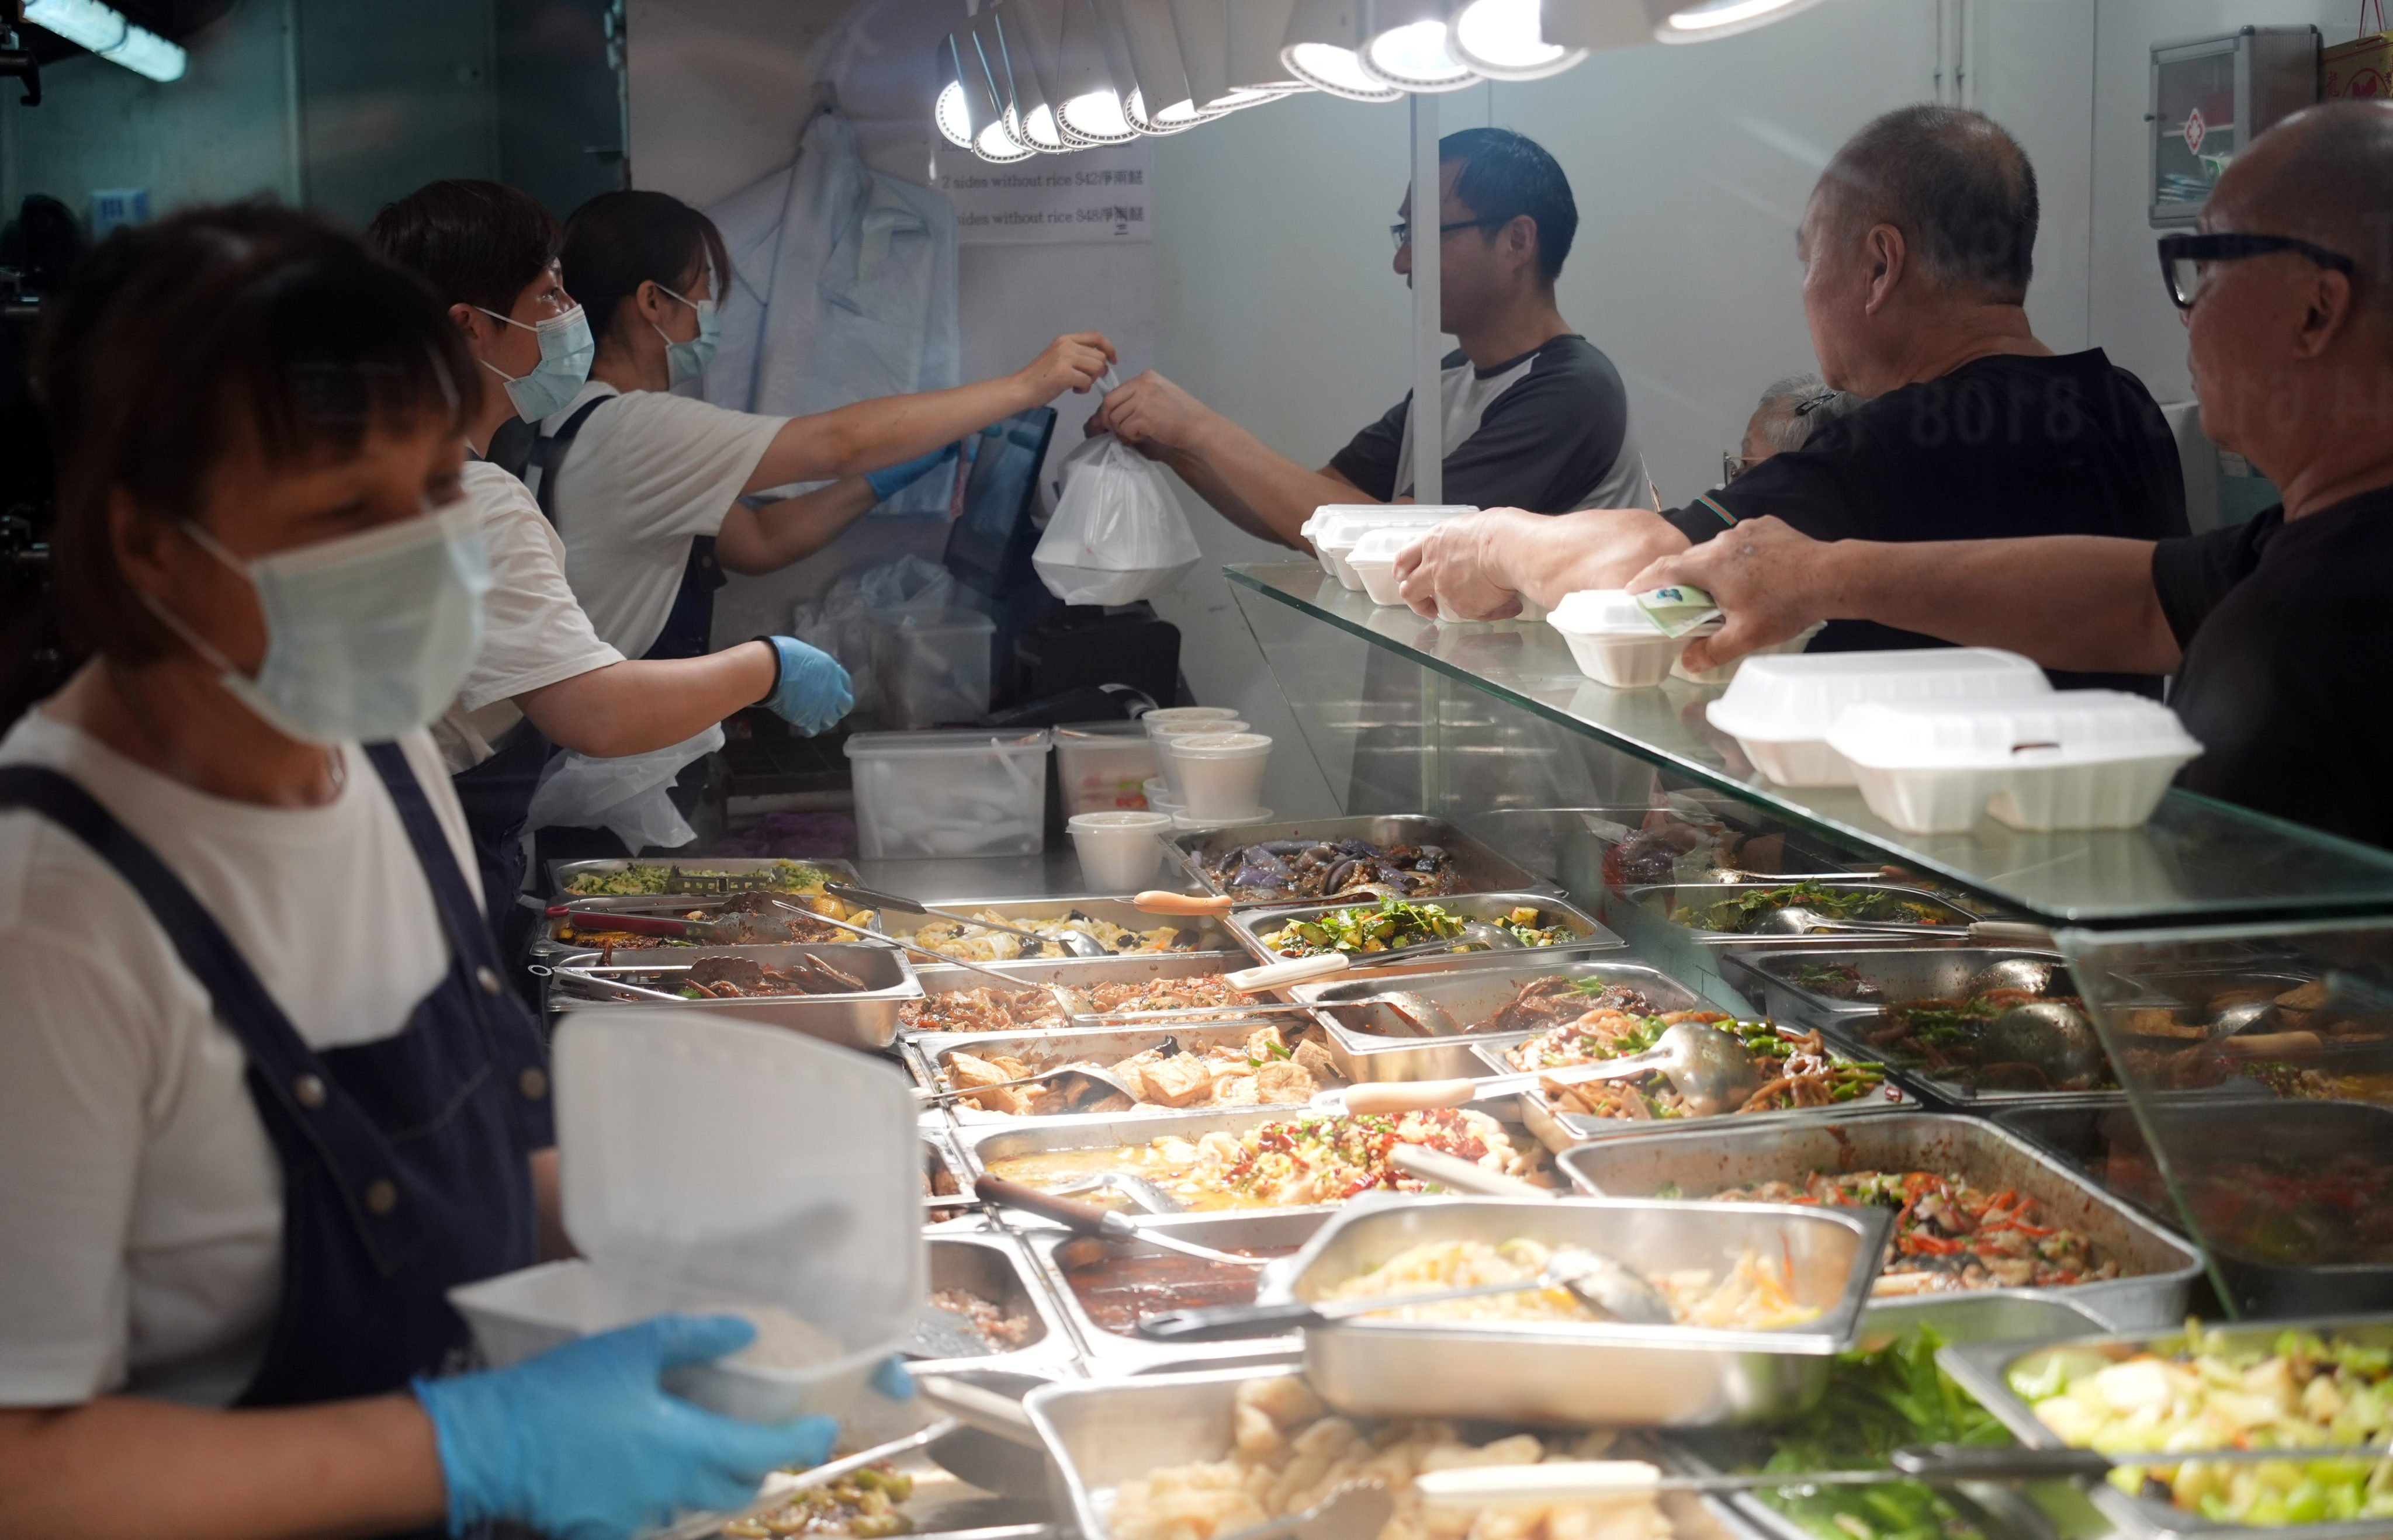 Earlier this year Macau took steps to eliminate the use of styrofoam boxes, plastic cups and plates, after last year banning disposable plastic cutlery, indicating the city’s appetite to address its solid waste issues. Photo: SCMP